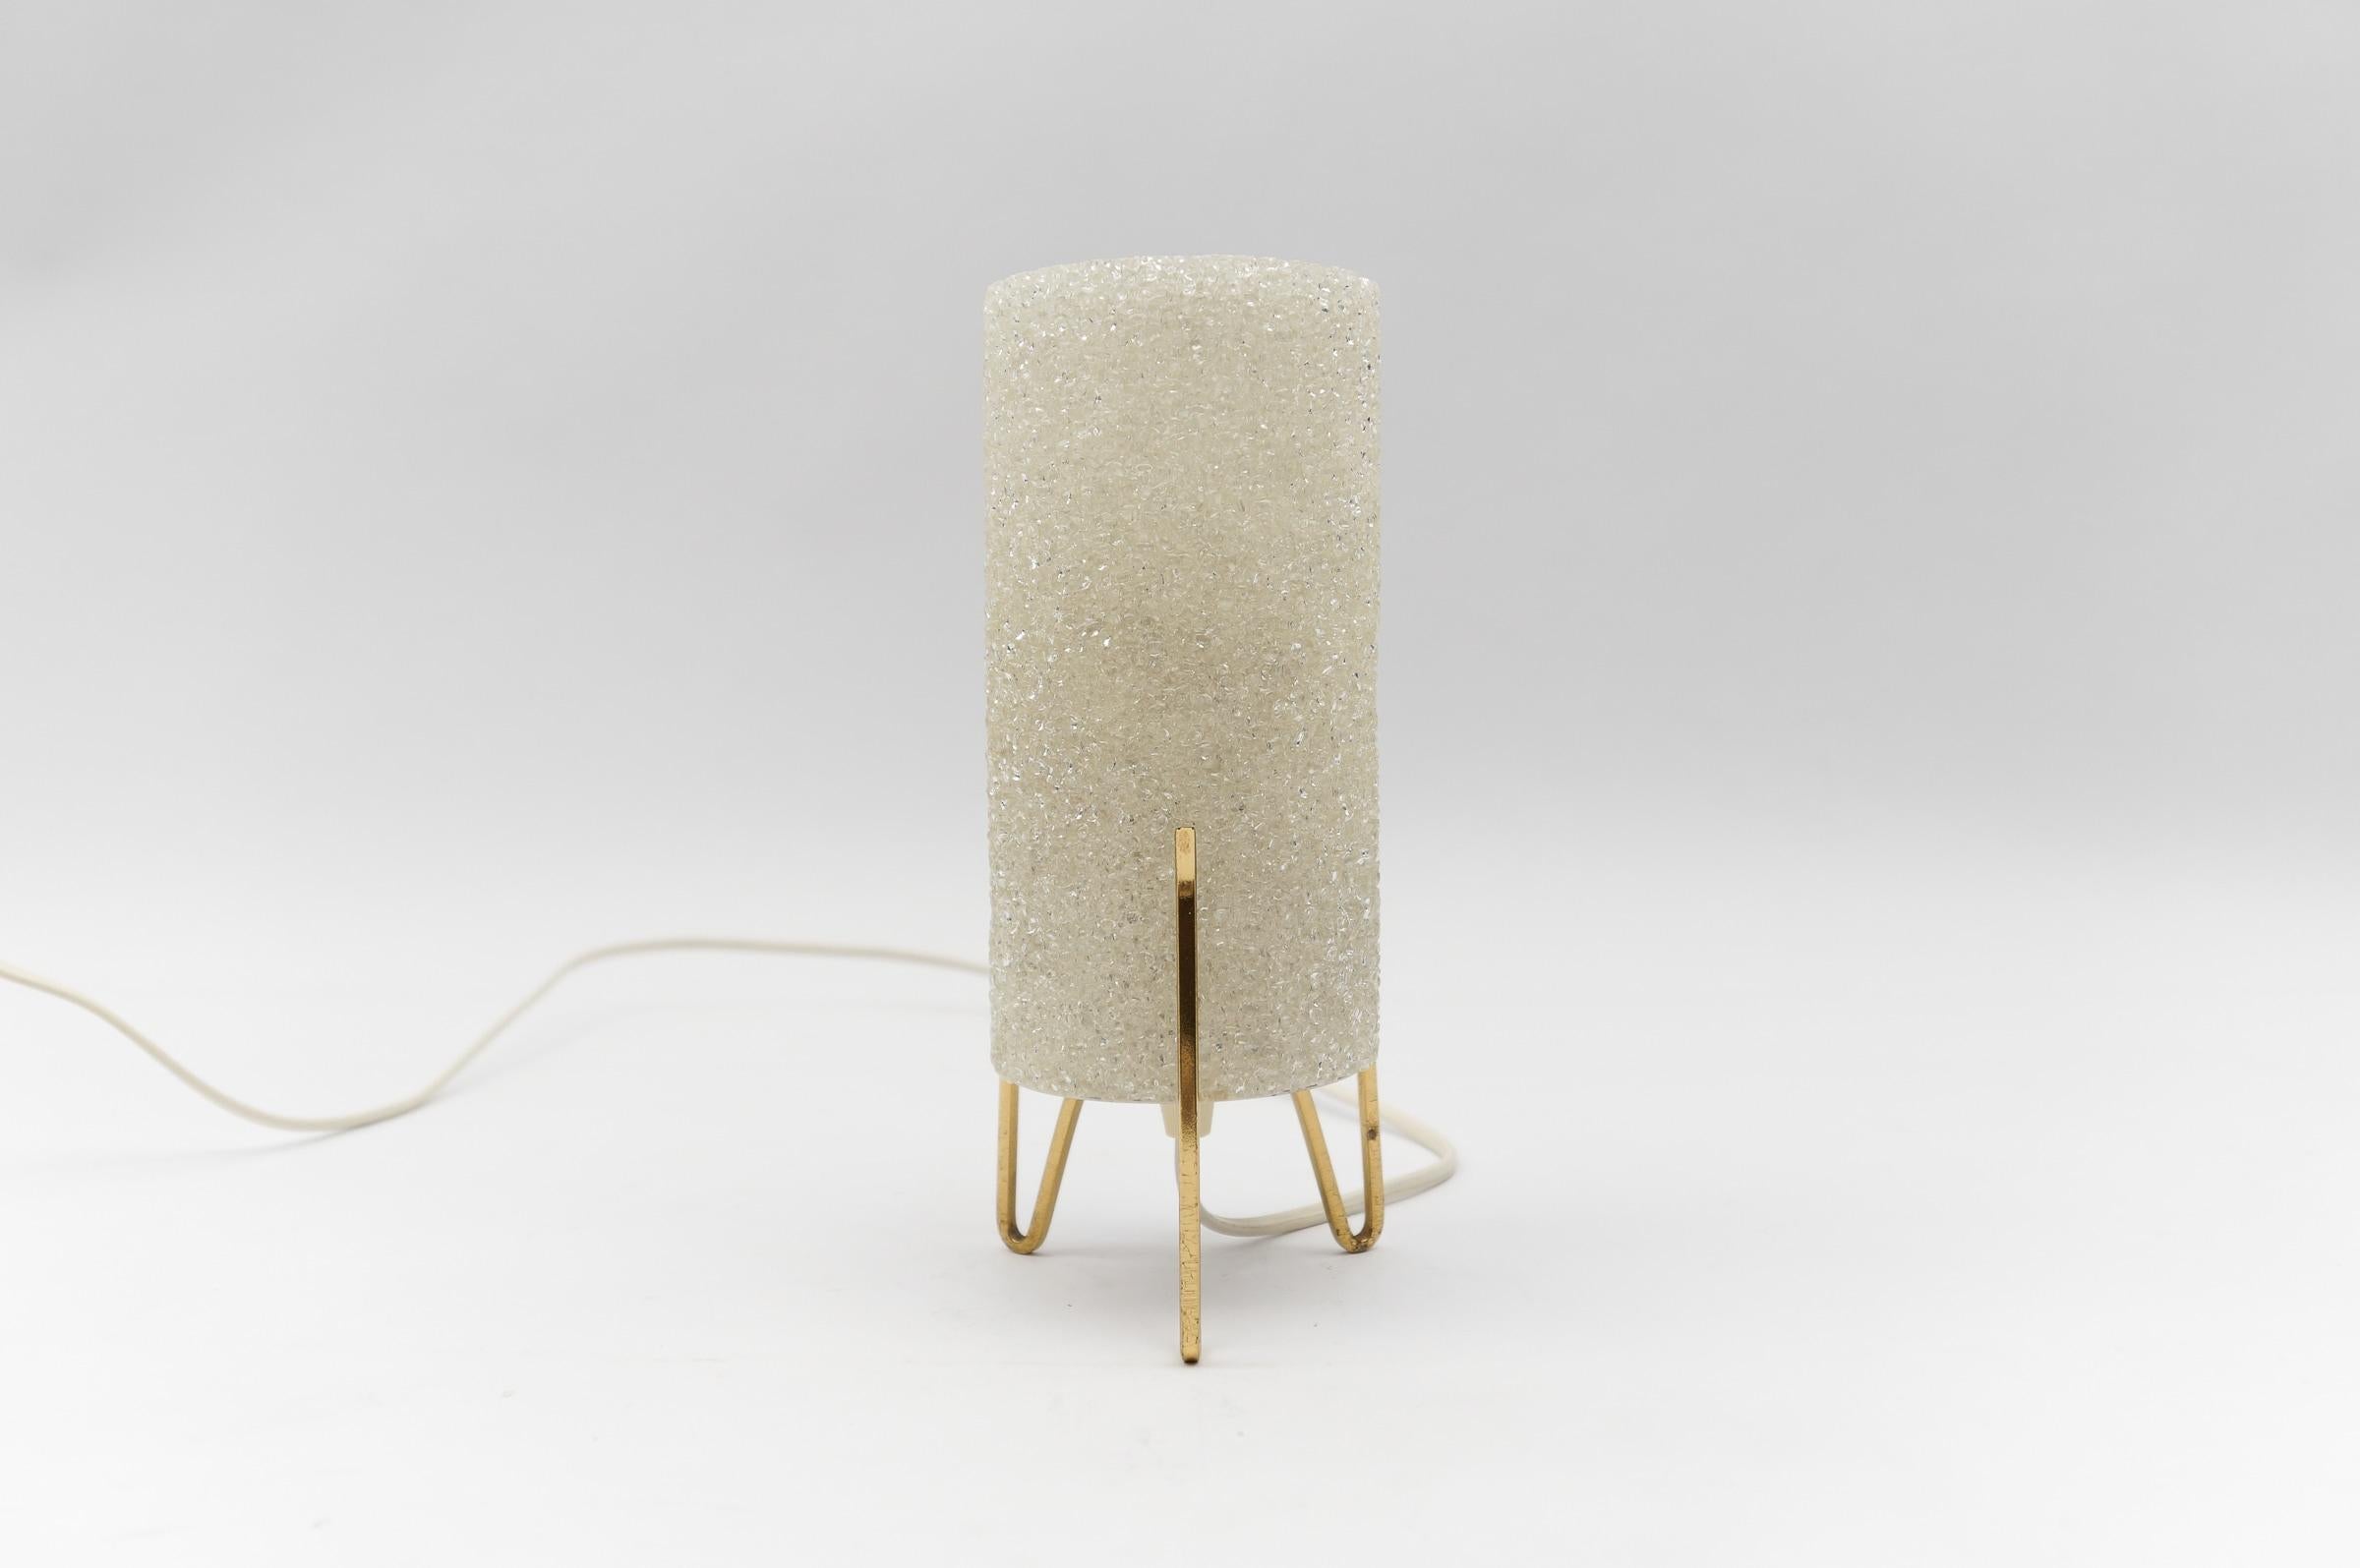 Petite Mid-Century Modern Tripod Table Lamp in Brass and Granulate, 1960s

Dimension
Height: 9.25 in (23,5 cm)
Width: 4.72 in (12 cm)

The lamp needs 1 x E14 / E15 Edison screw fit bulb, is wired, and in working condition. It runs both on 110 / 230